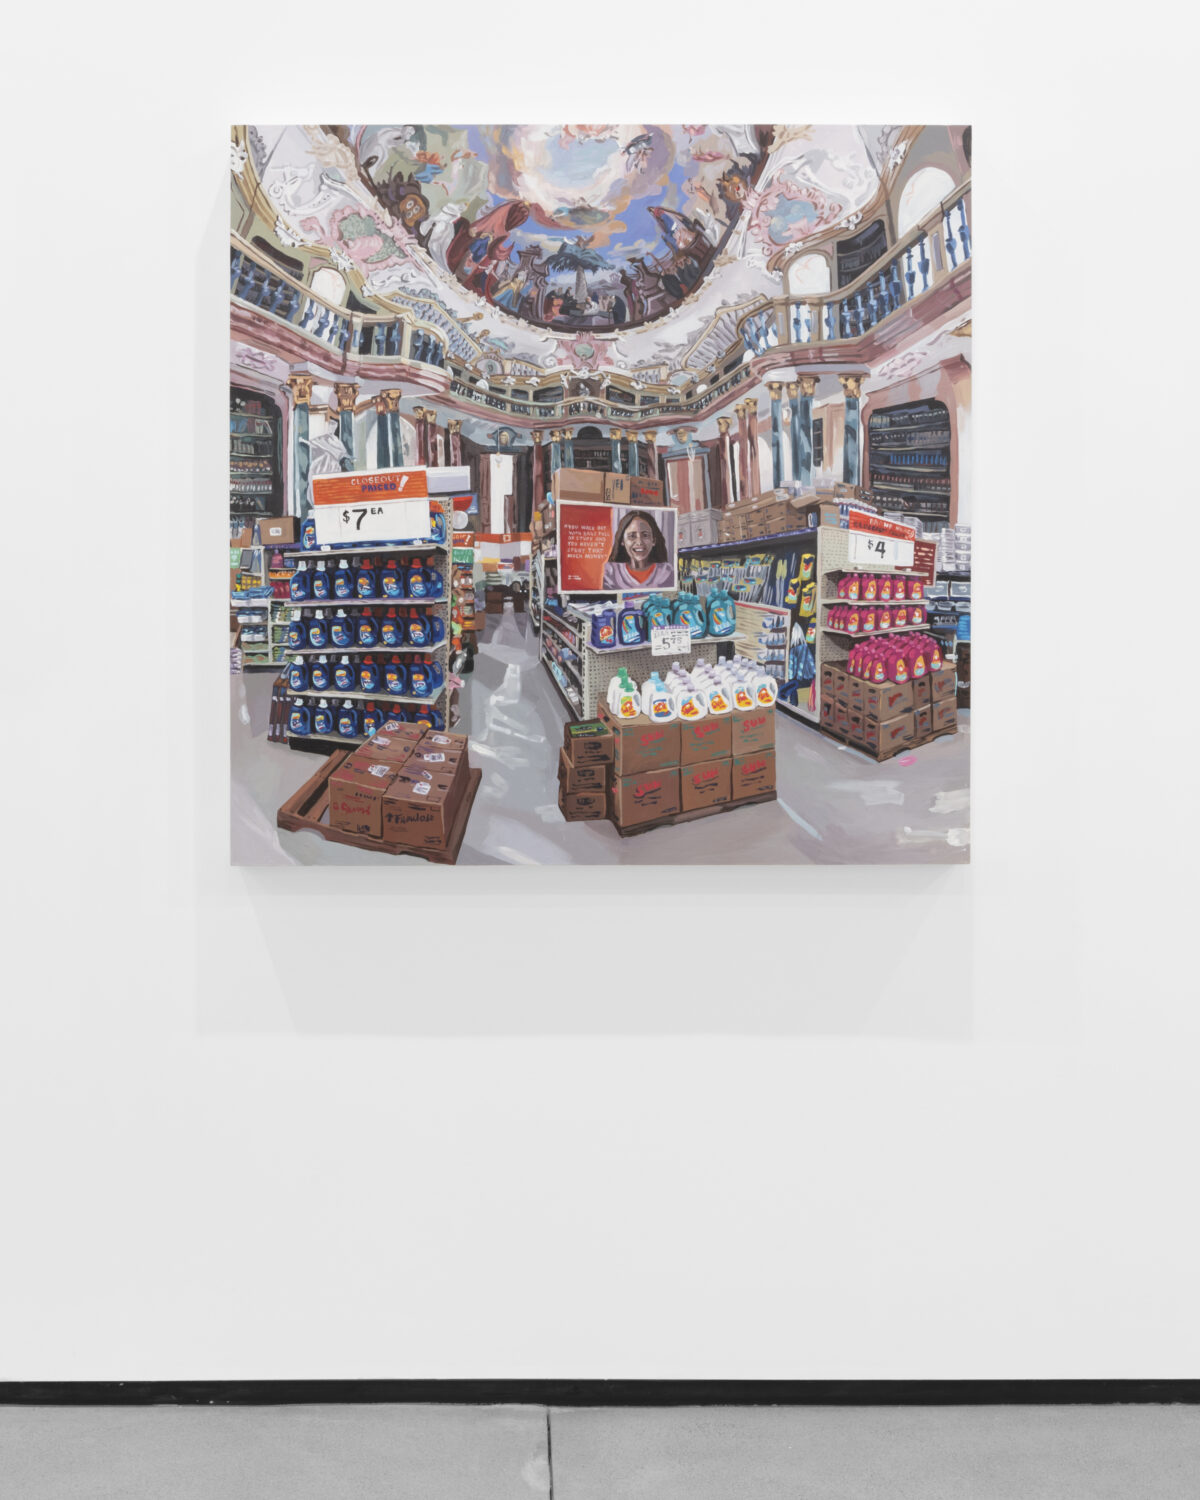 A supermarket inside of a mausoleum, the ceiling with intricate murals of religious iconography.